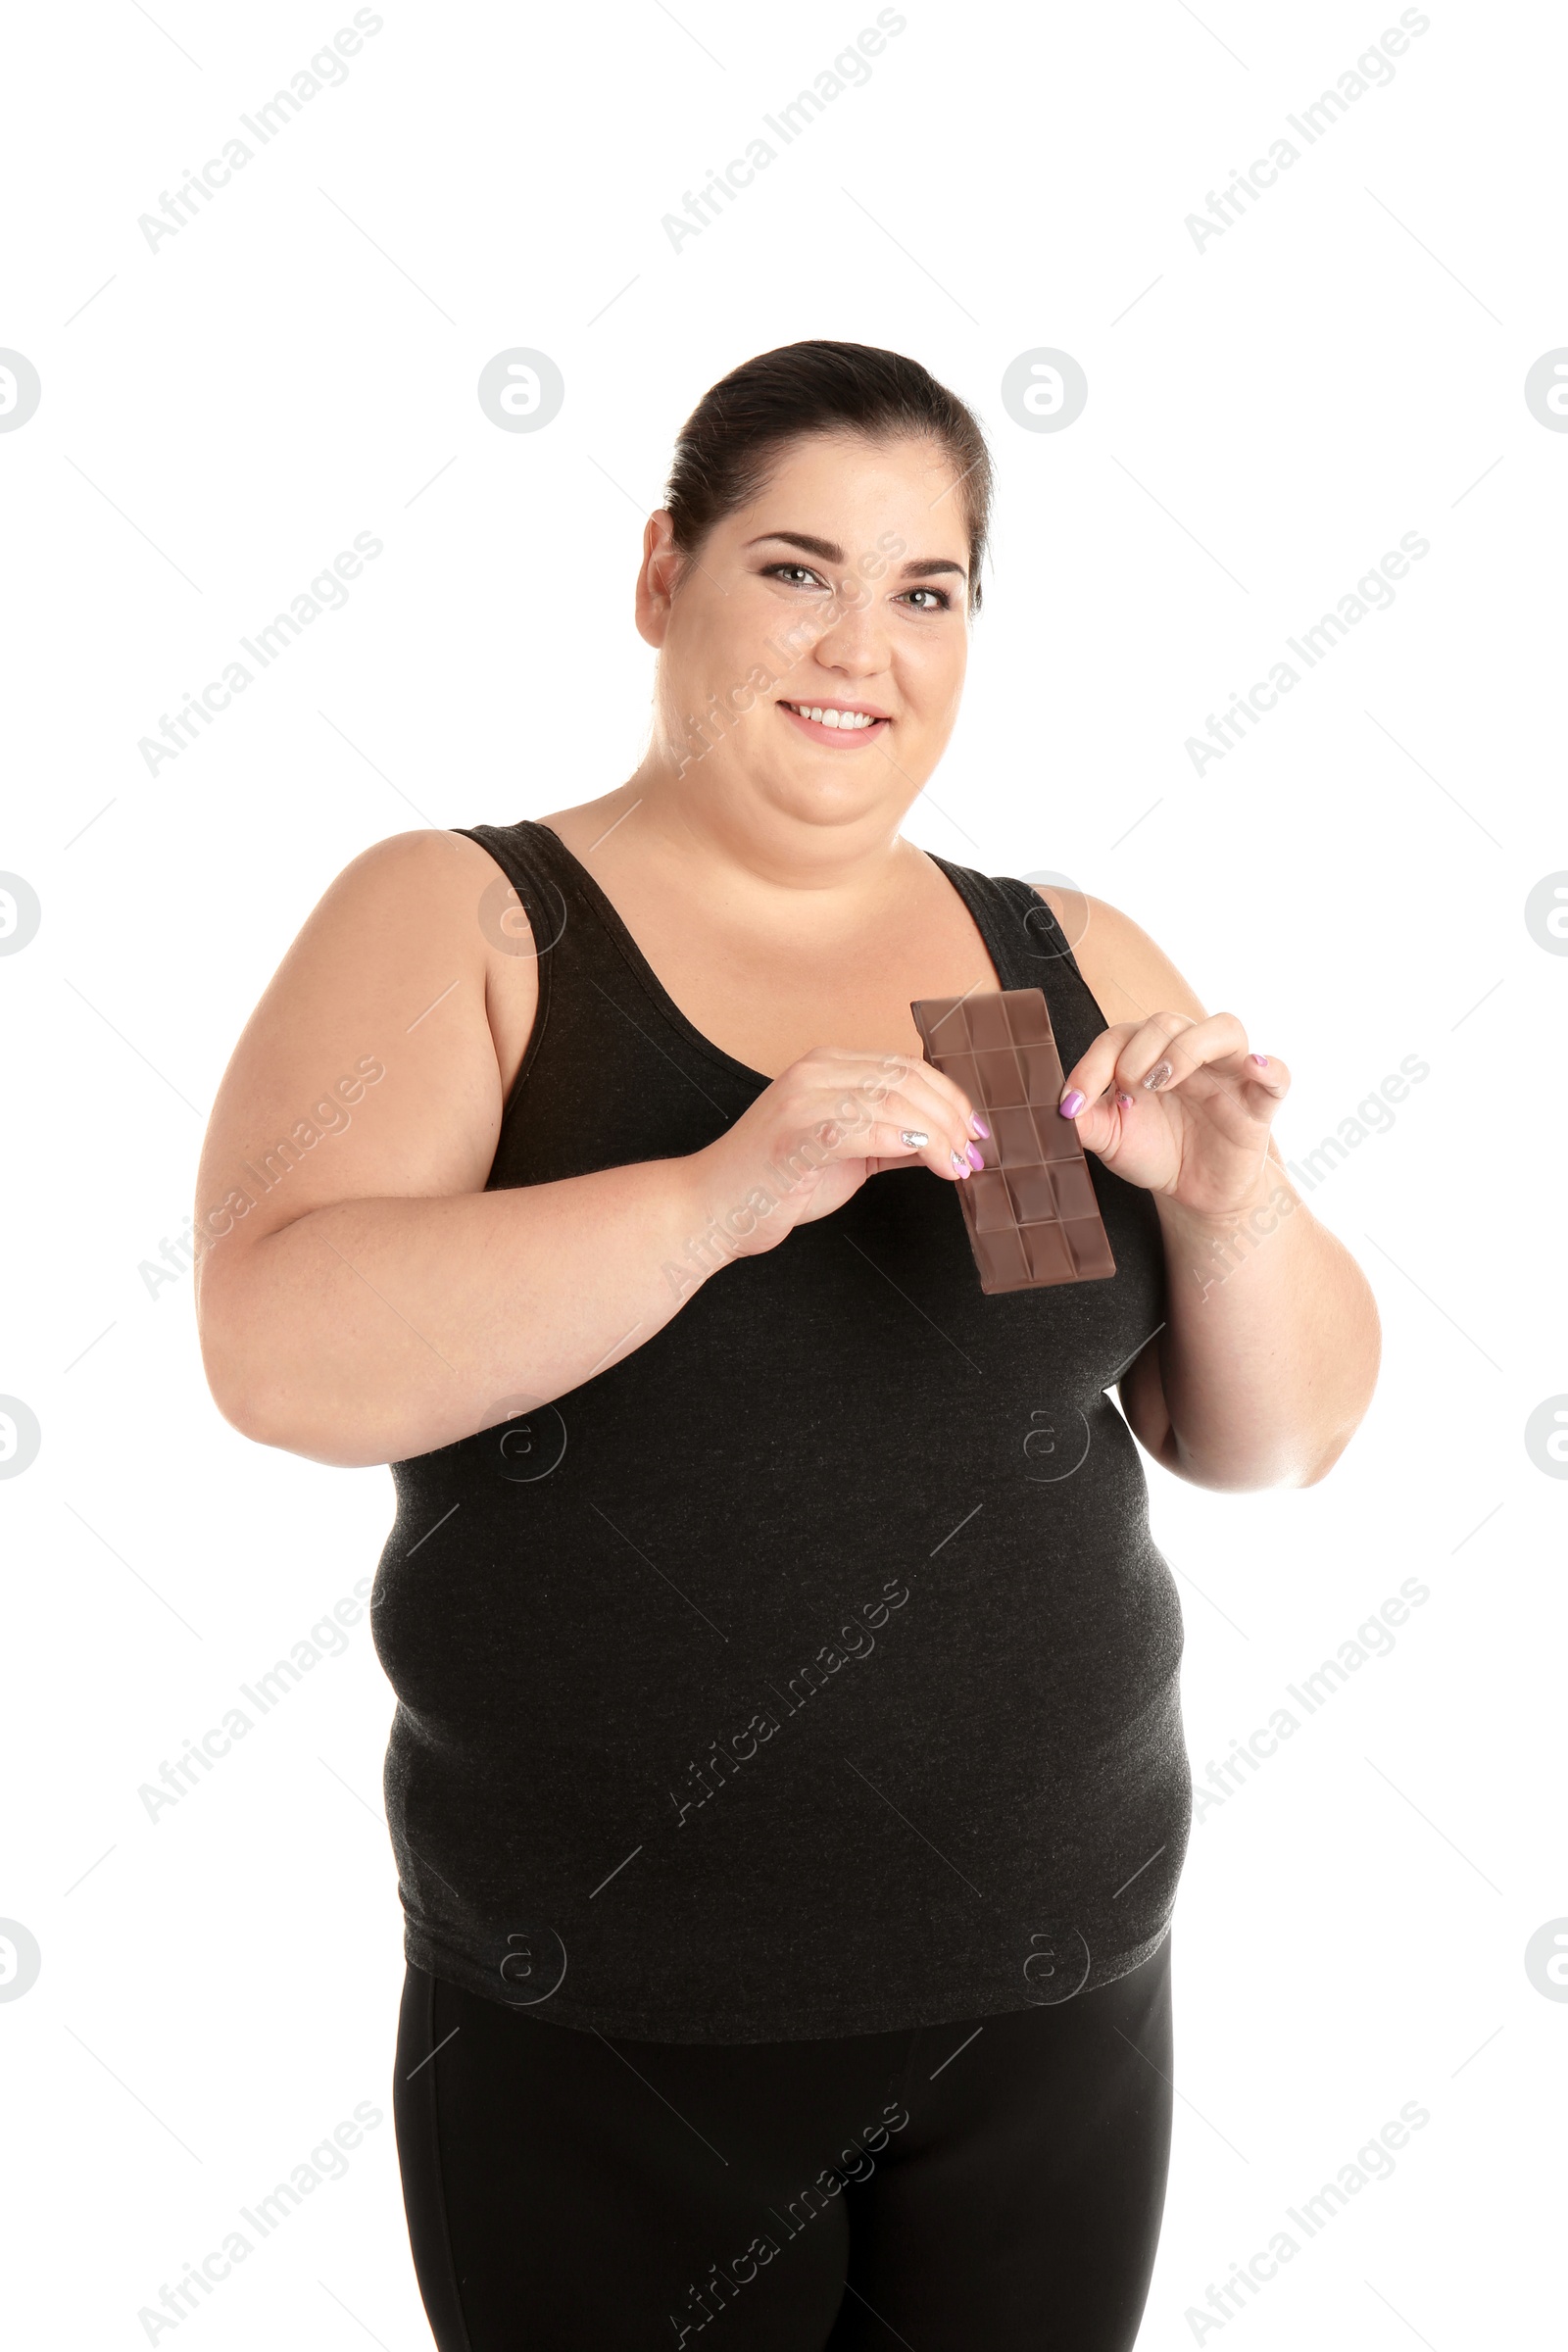 Photo of Overweight woman with chocolate bar on white background